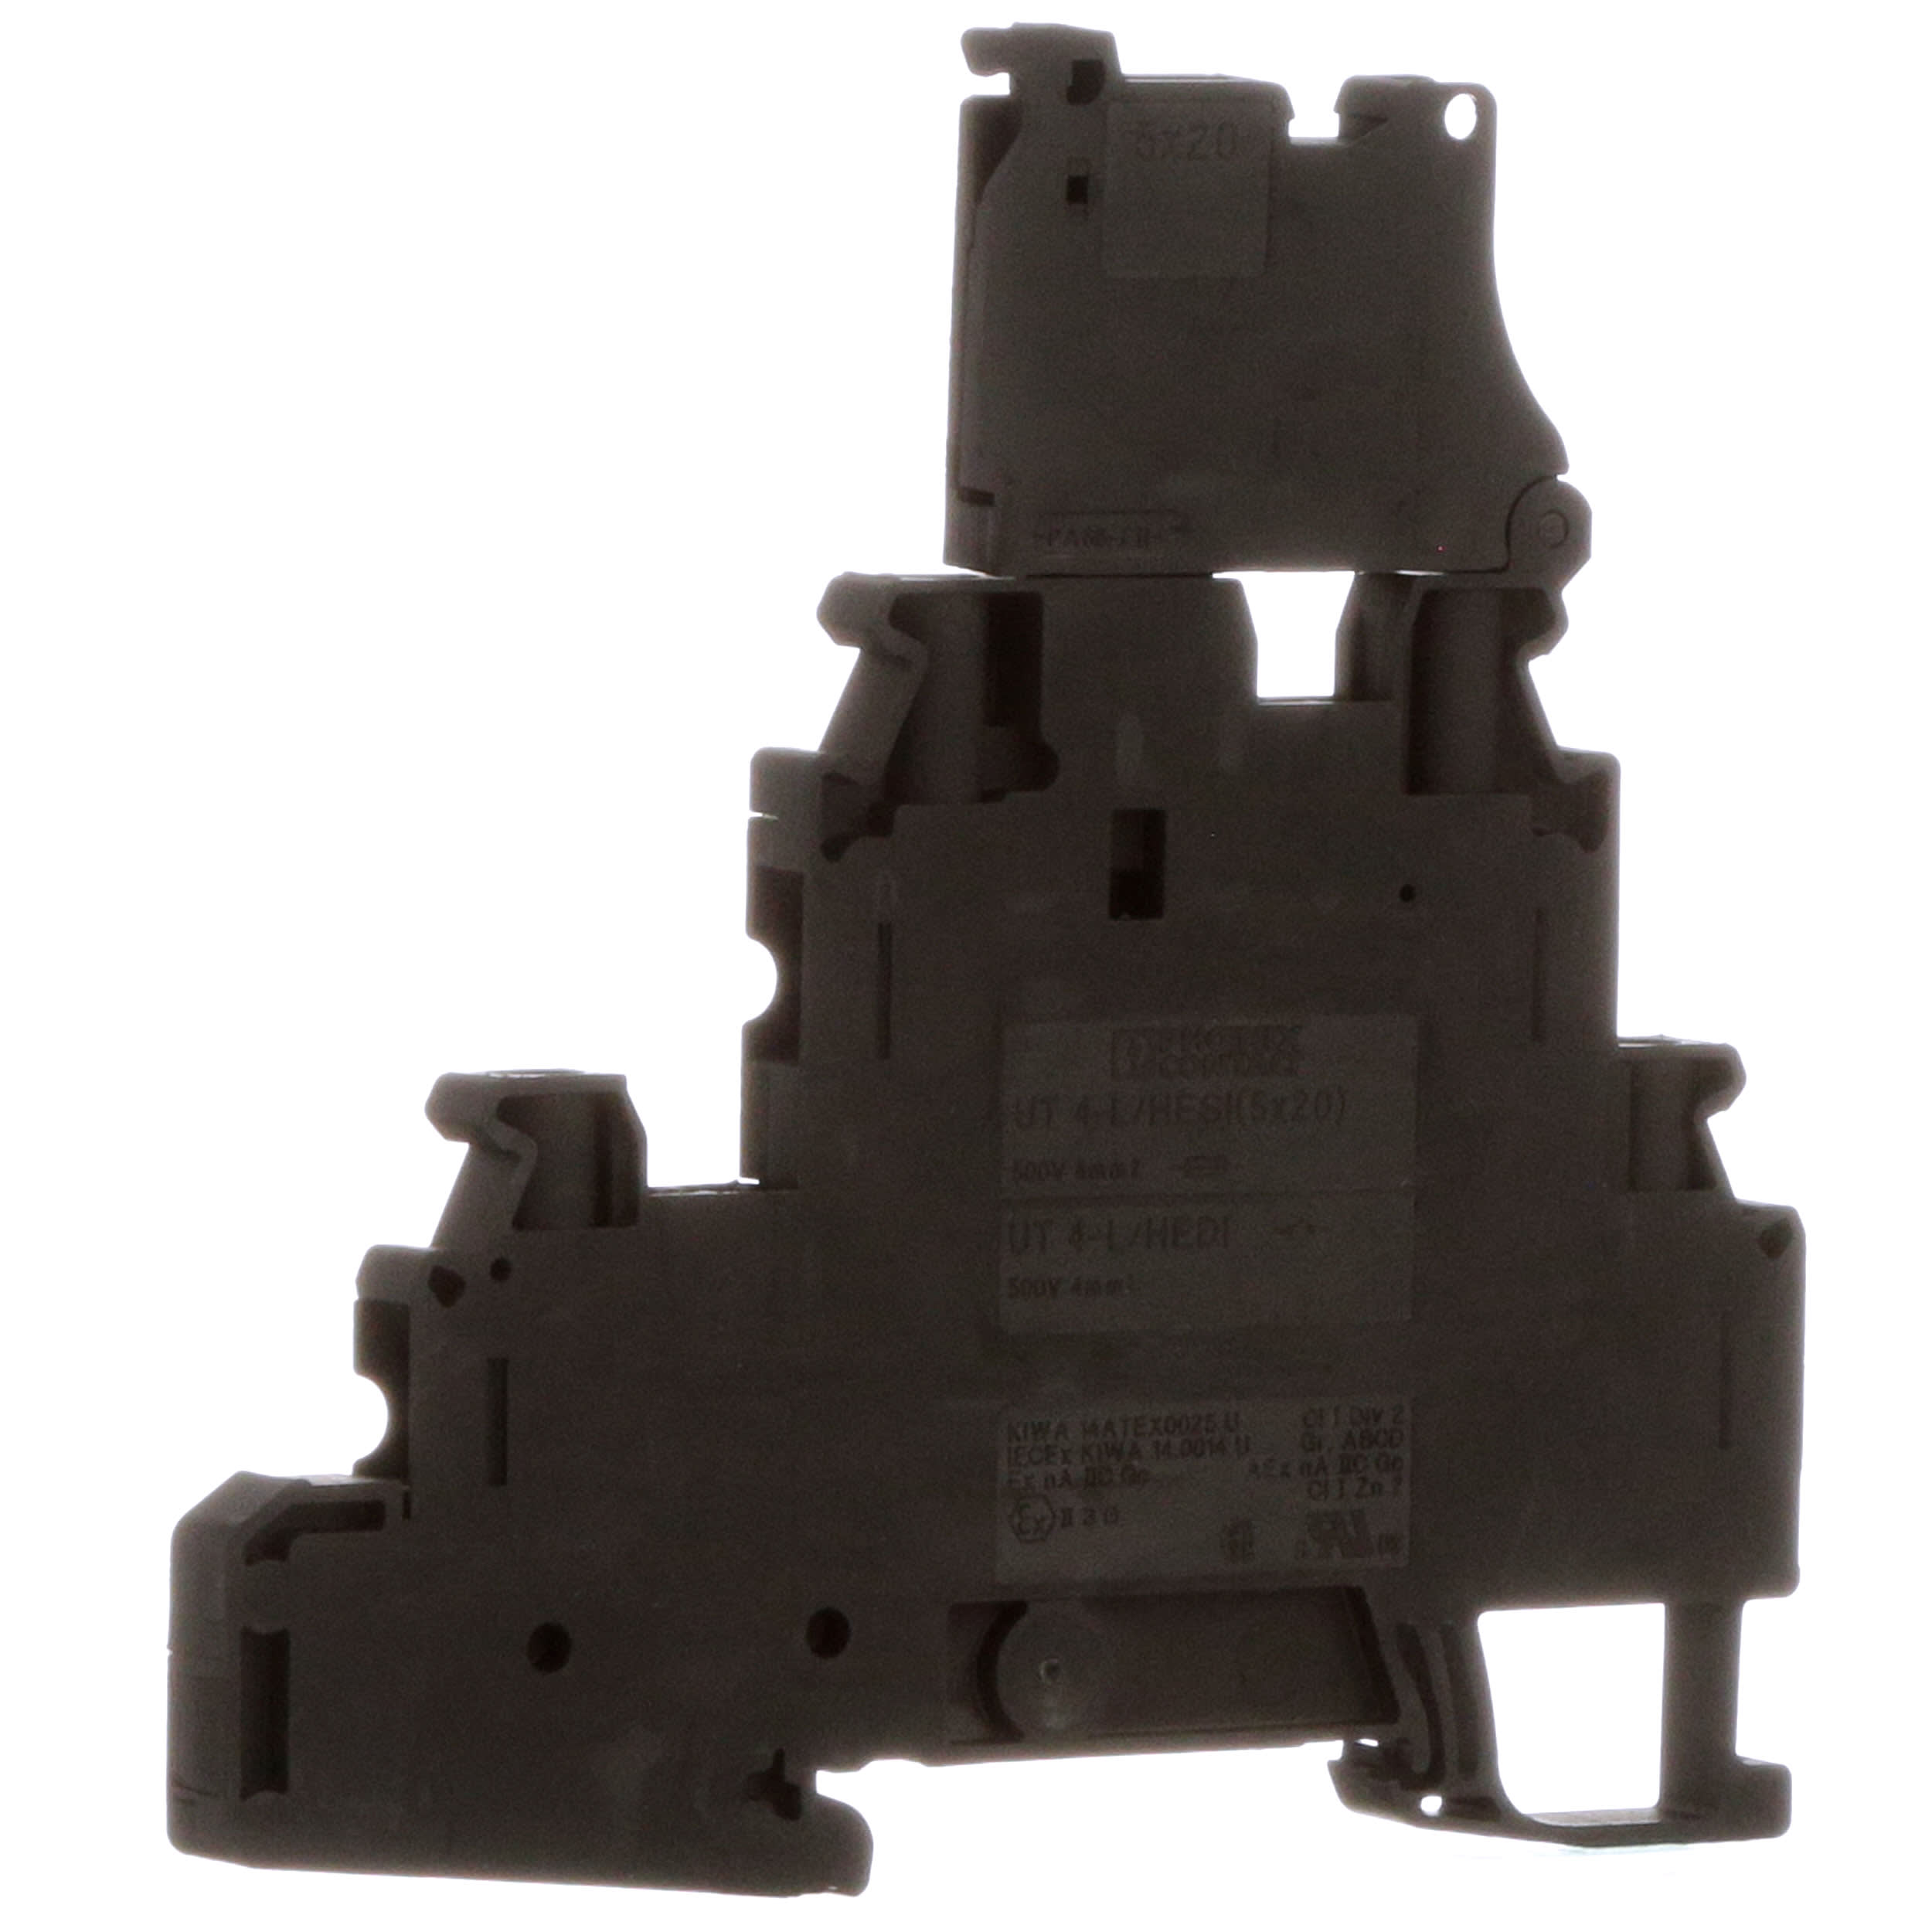 Phoenix Contact - 3214325 - Fuse Terminal Block for Type G Insert